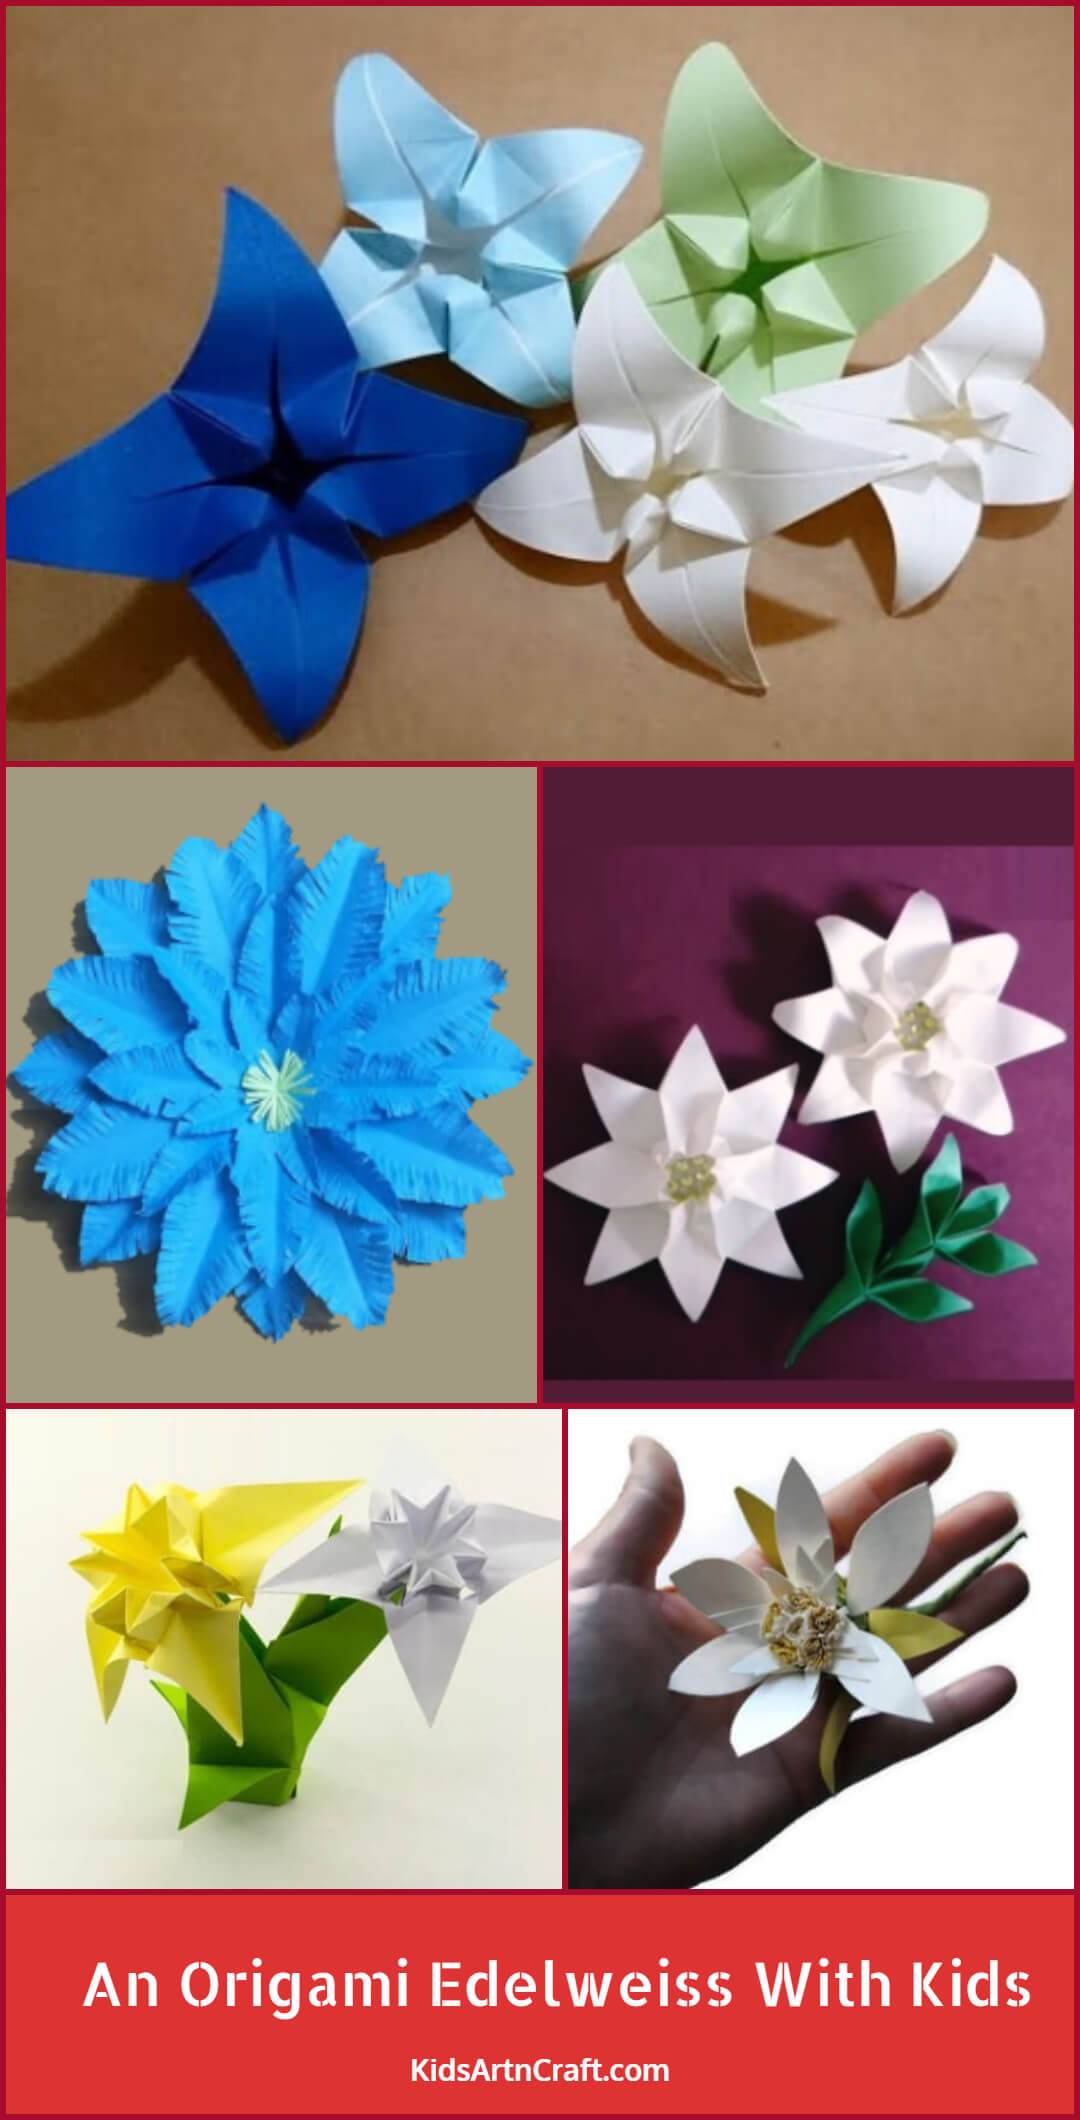 How To Make An Origami Edelweiss With Kids